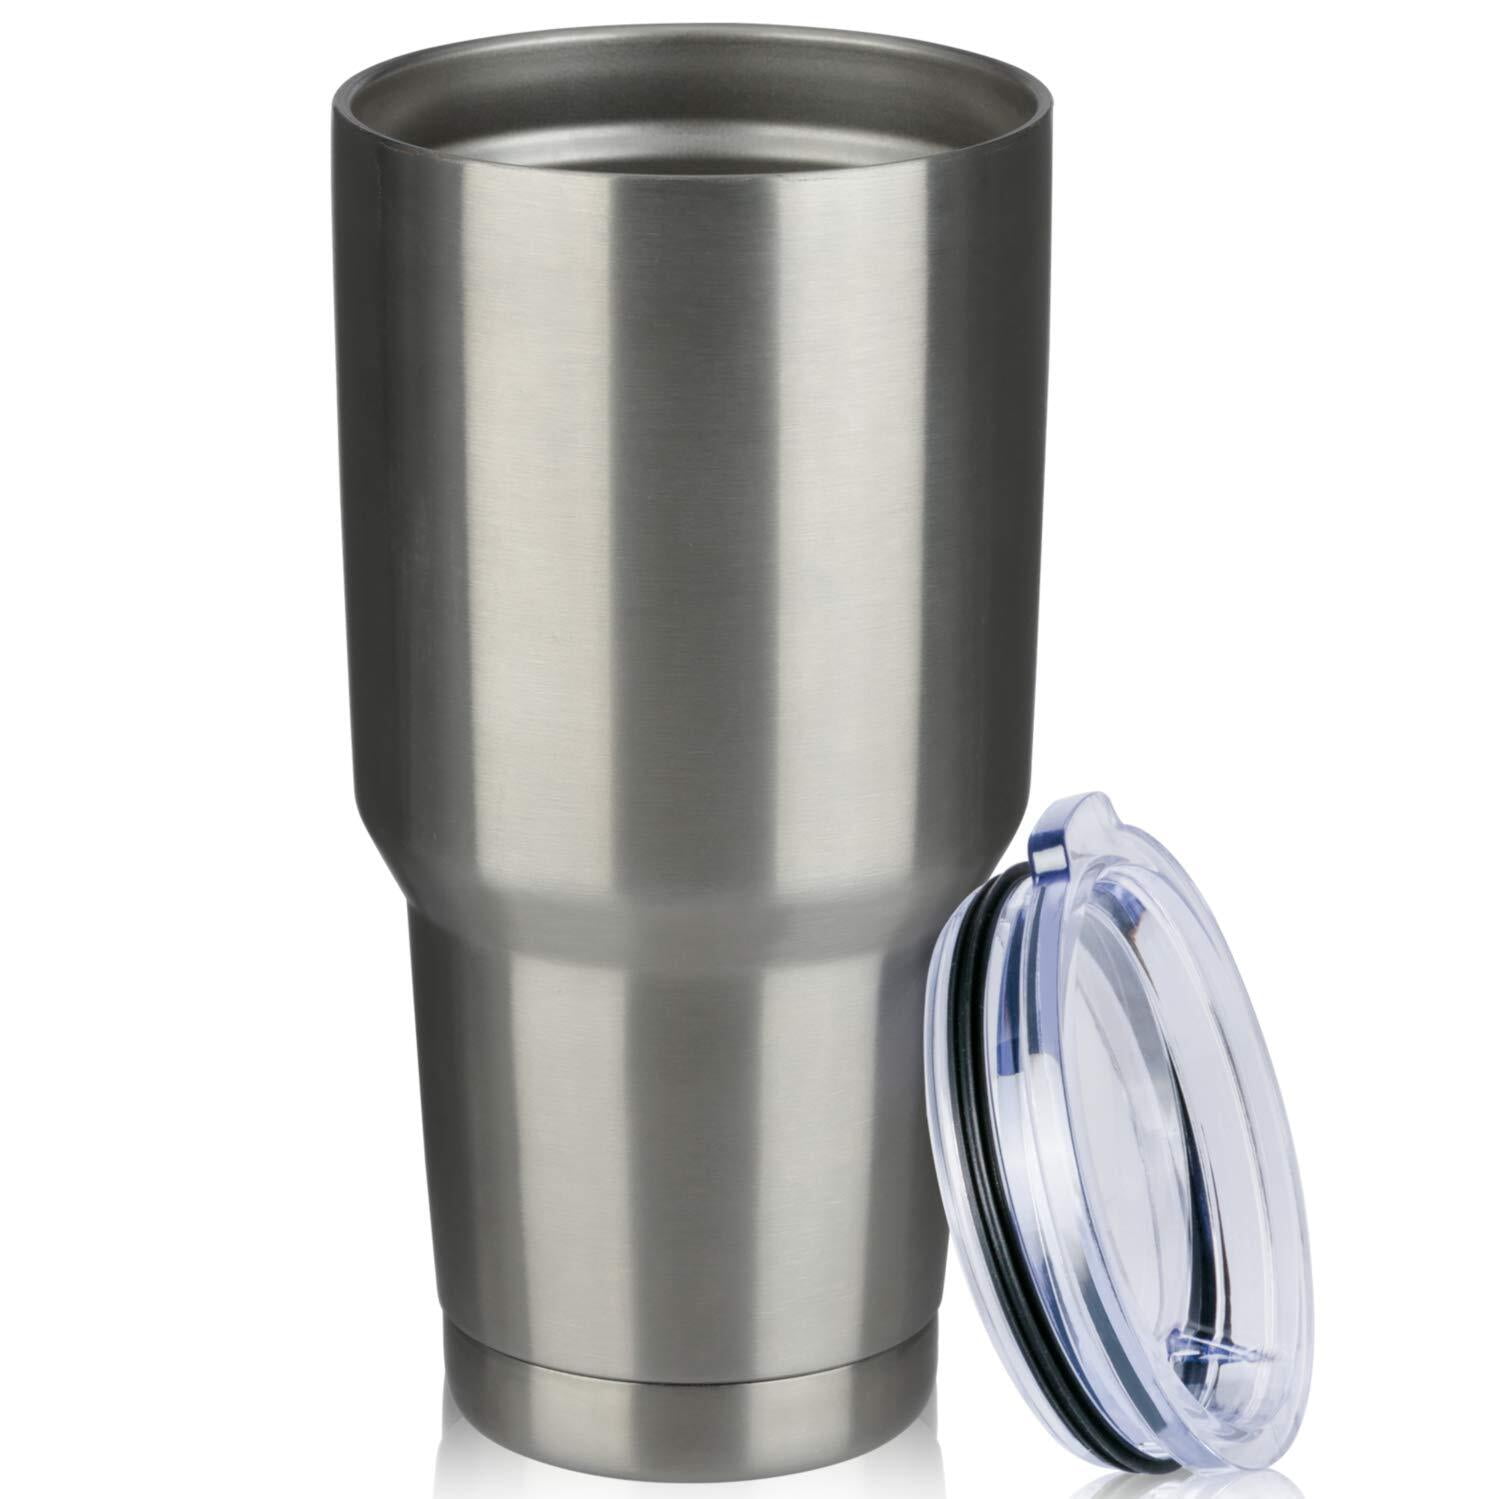  Beast 30 oz Tumbler Stainless Steel Vacuum Insulated Coffee Ice  Cup Double Wall Travel Flask (Stainless Steel) : Home & Kitchen